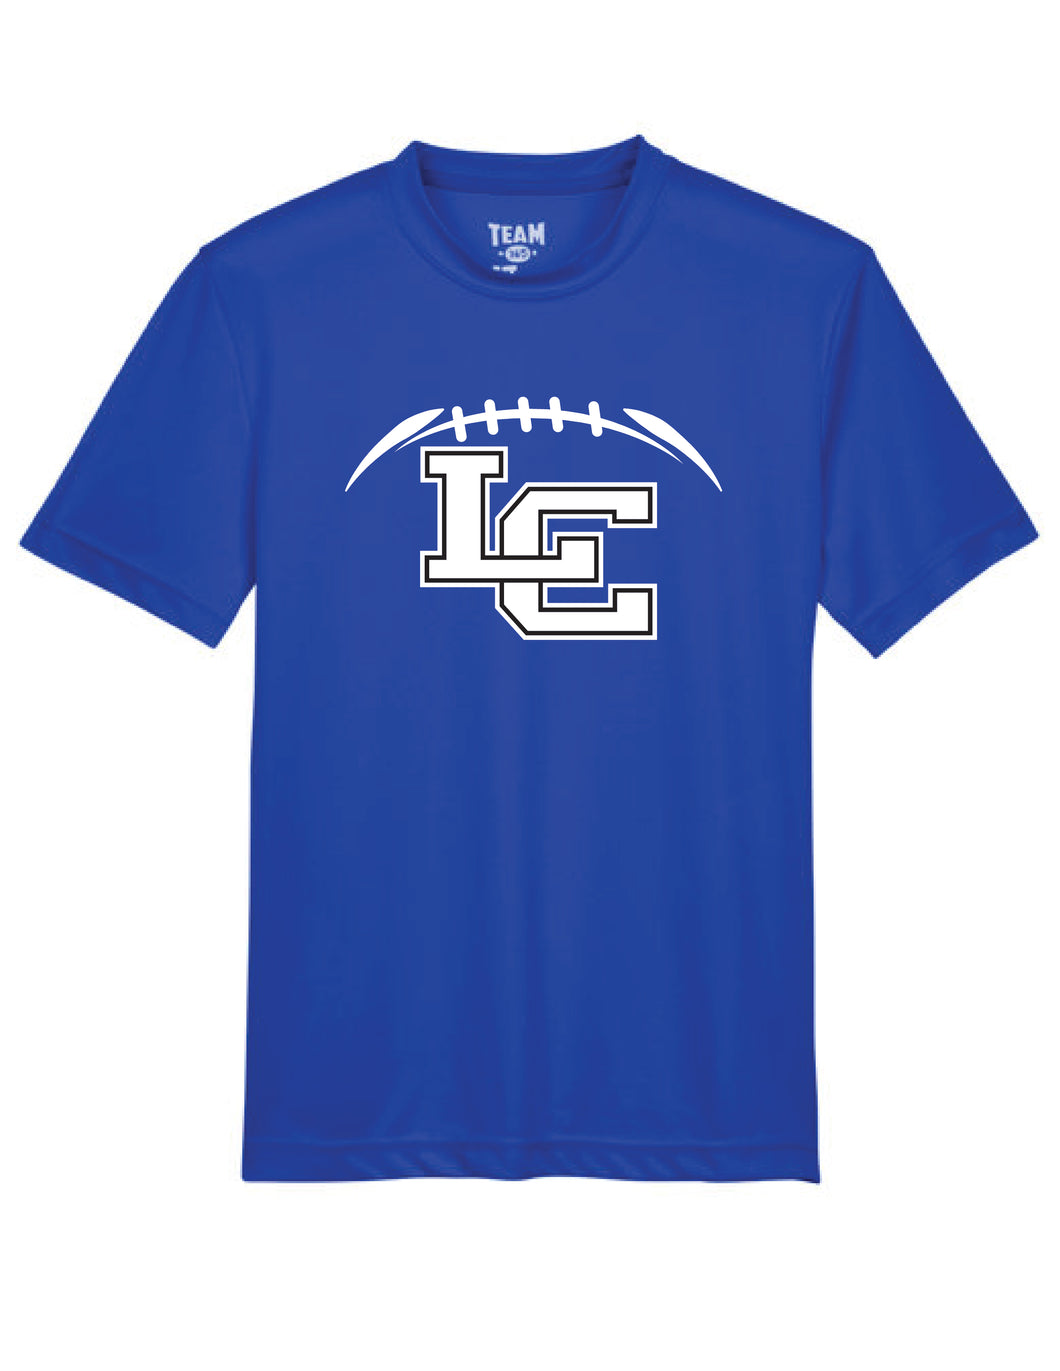 LC Football Dry Fit T-Shirt blue